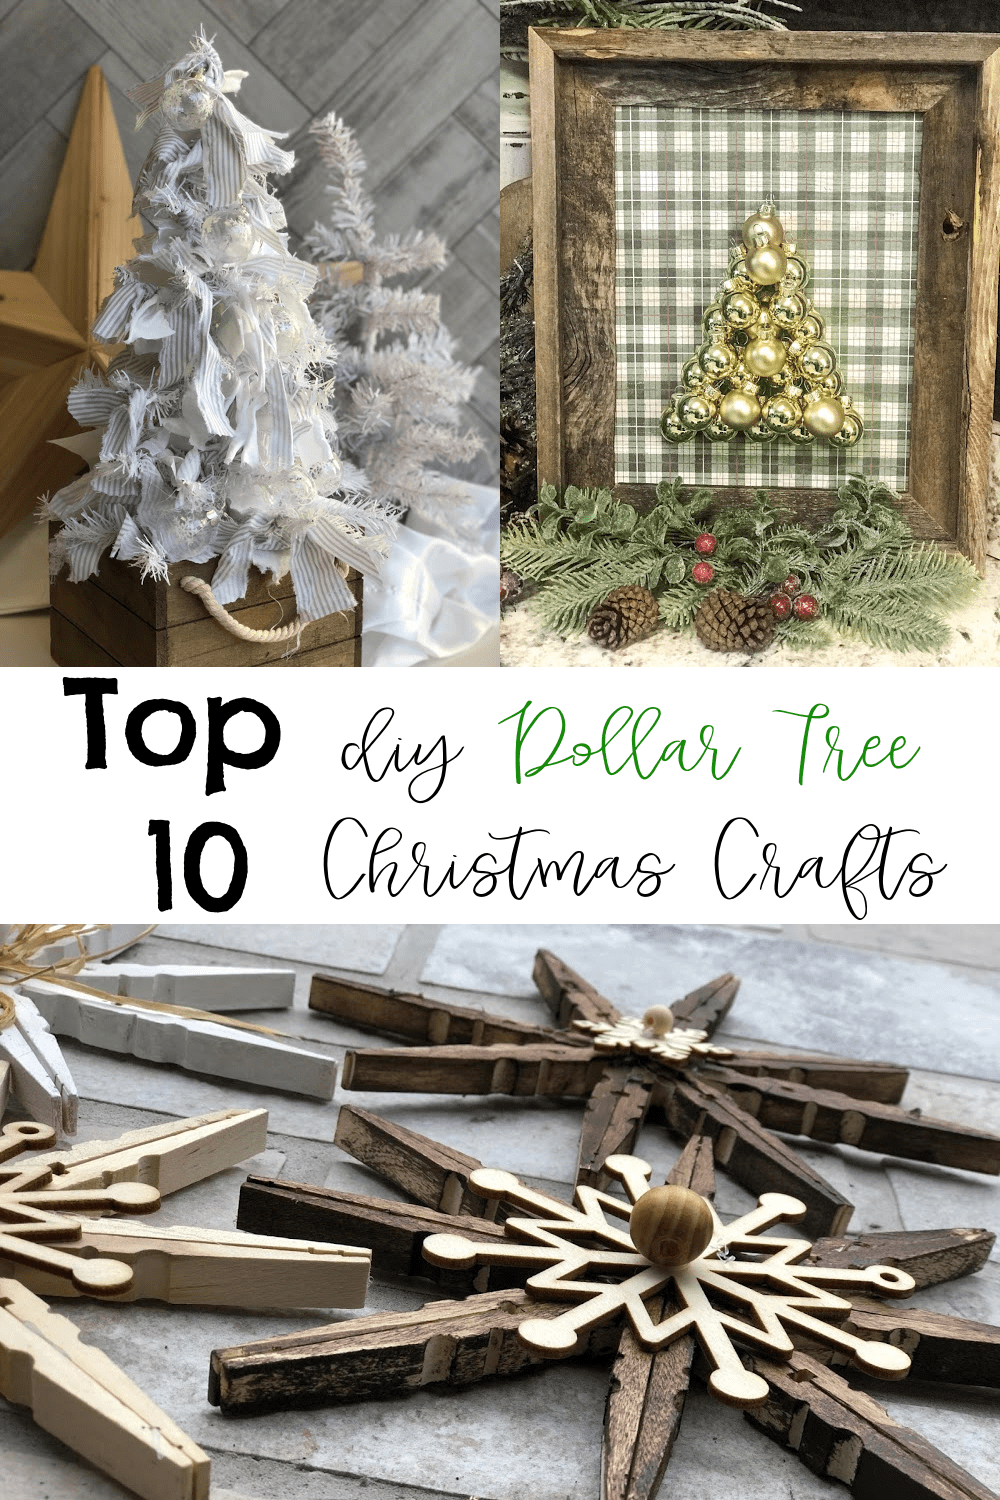 Top 10 Dollar Tree Christmas Projects - Re-Fabbed -   16 xmas crafts decorations dollar stores ideas